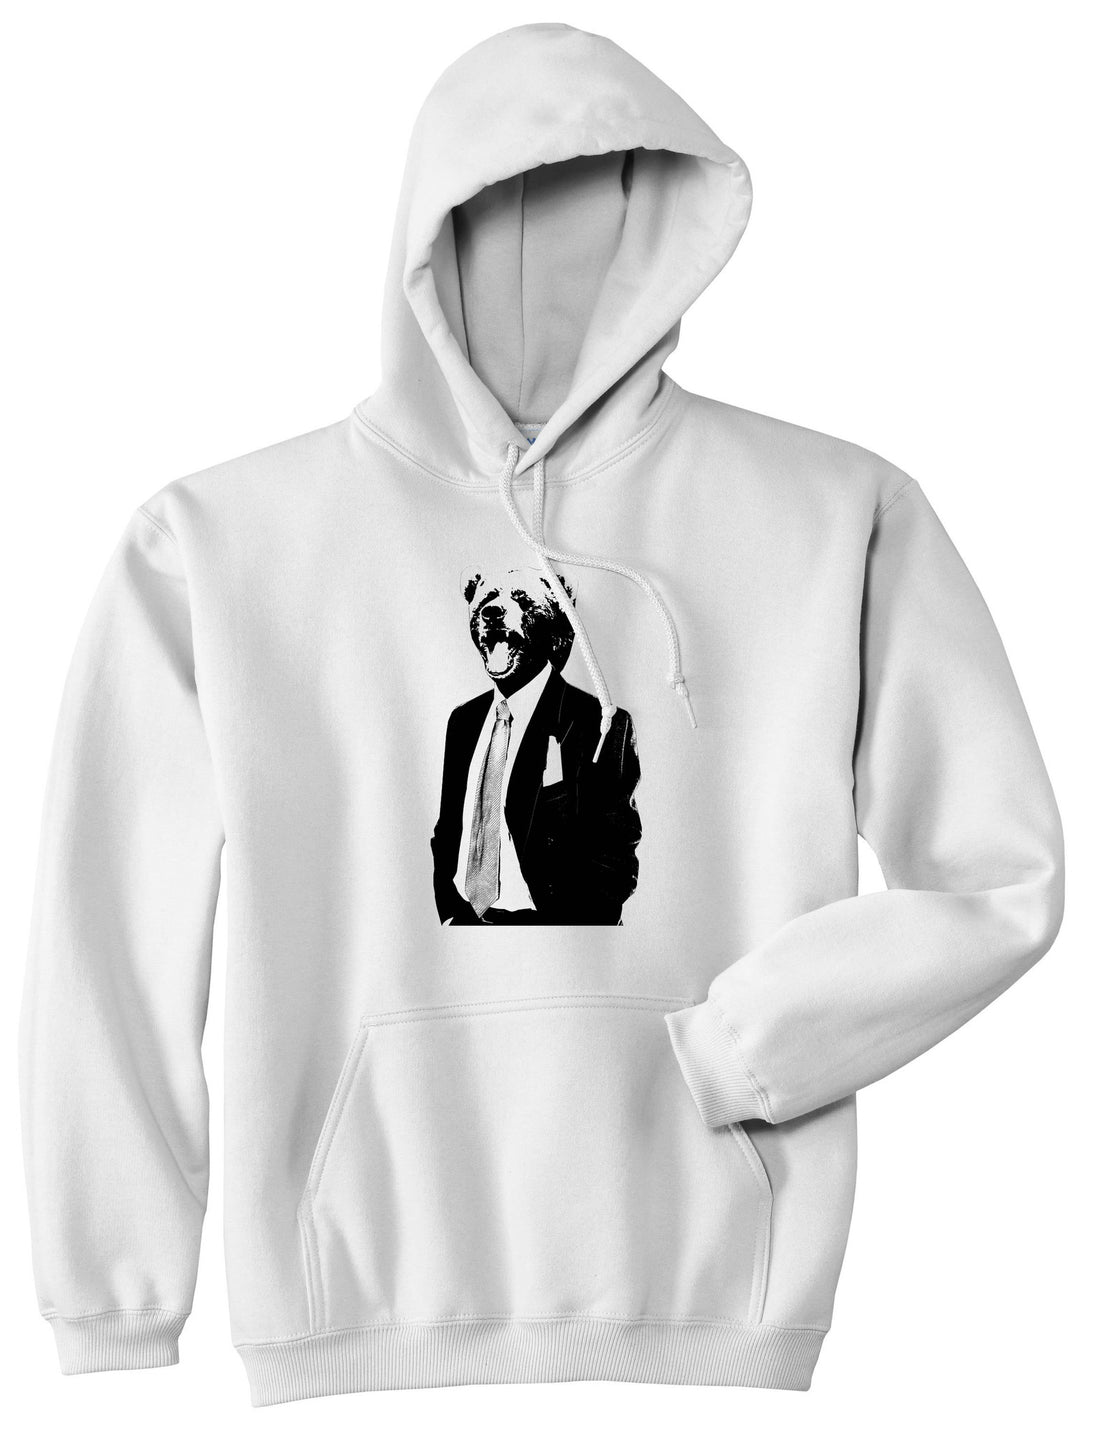 Bear In Suit Funny Pullover Hoodie